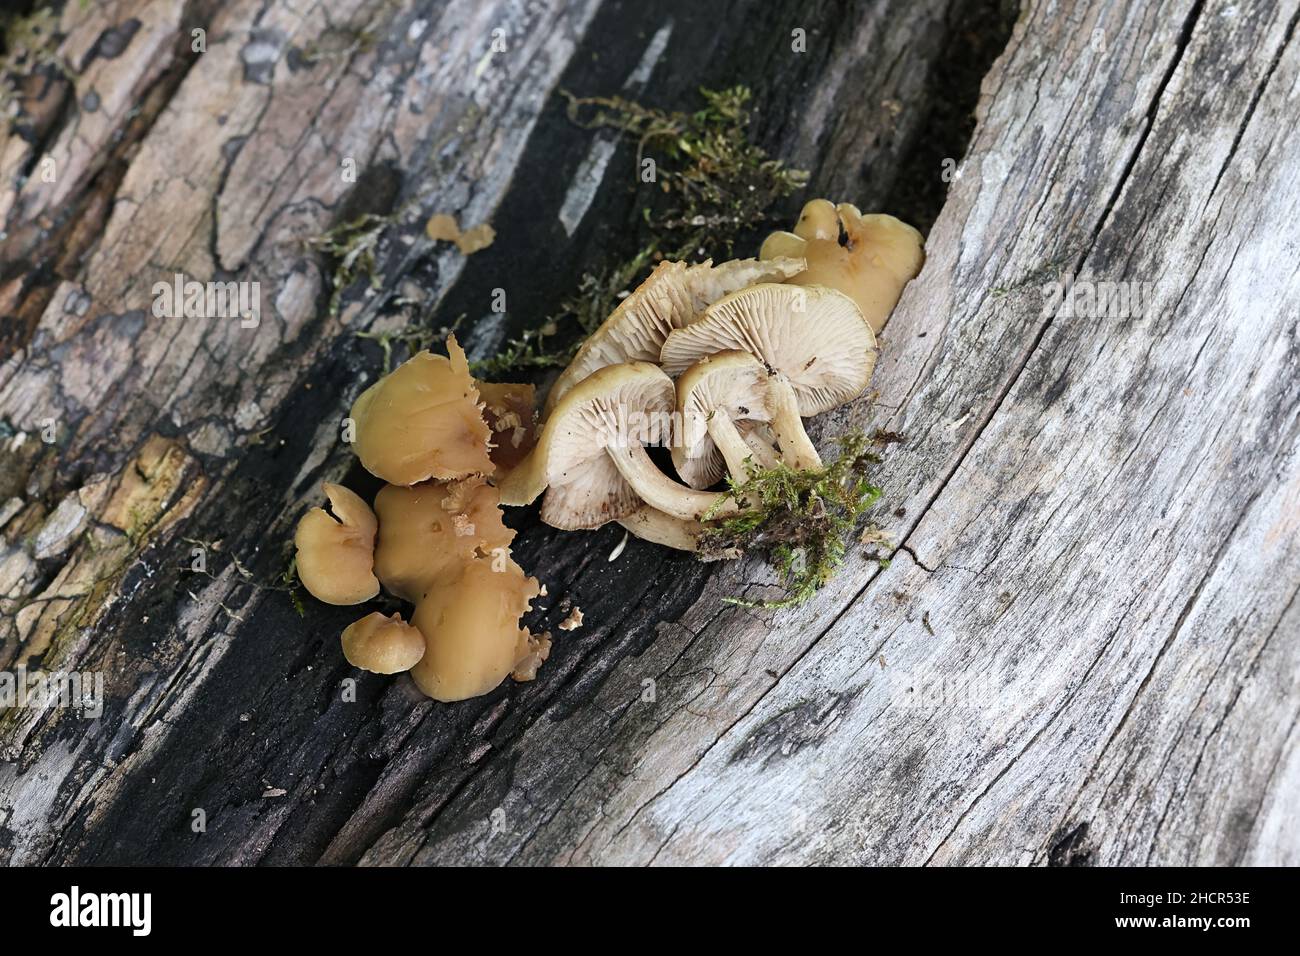 Simocybe centunculus, commonly known as dingy twiglet, wild mushroom from Finland Stock Photo